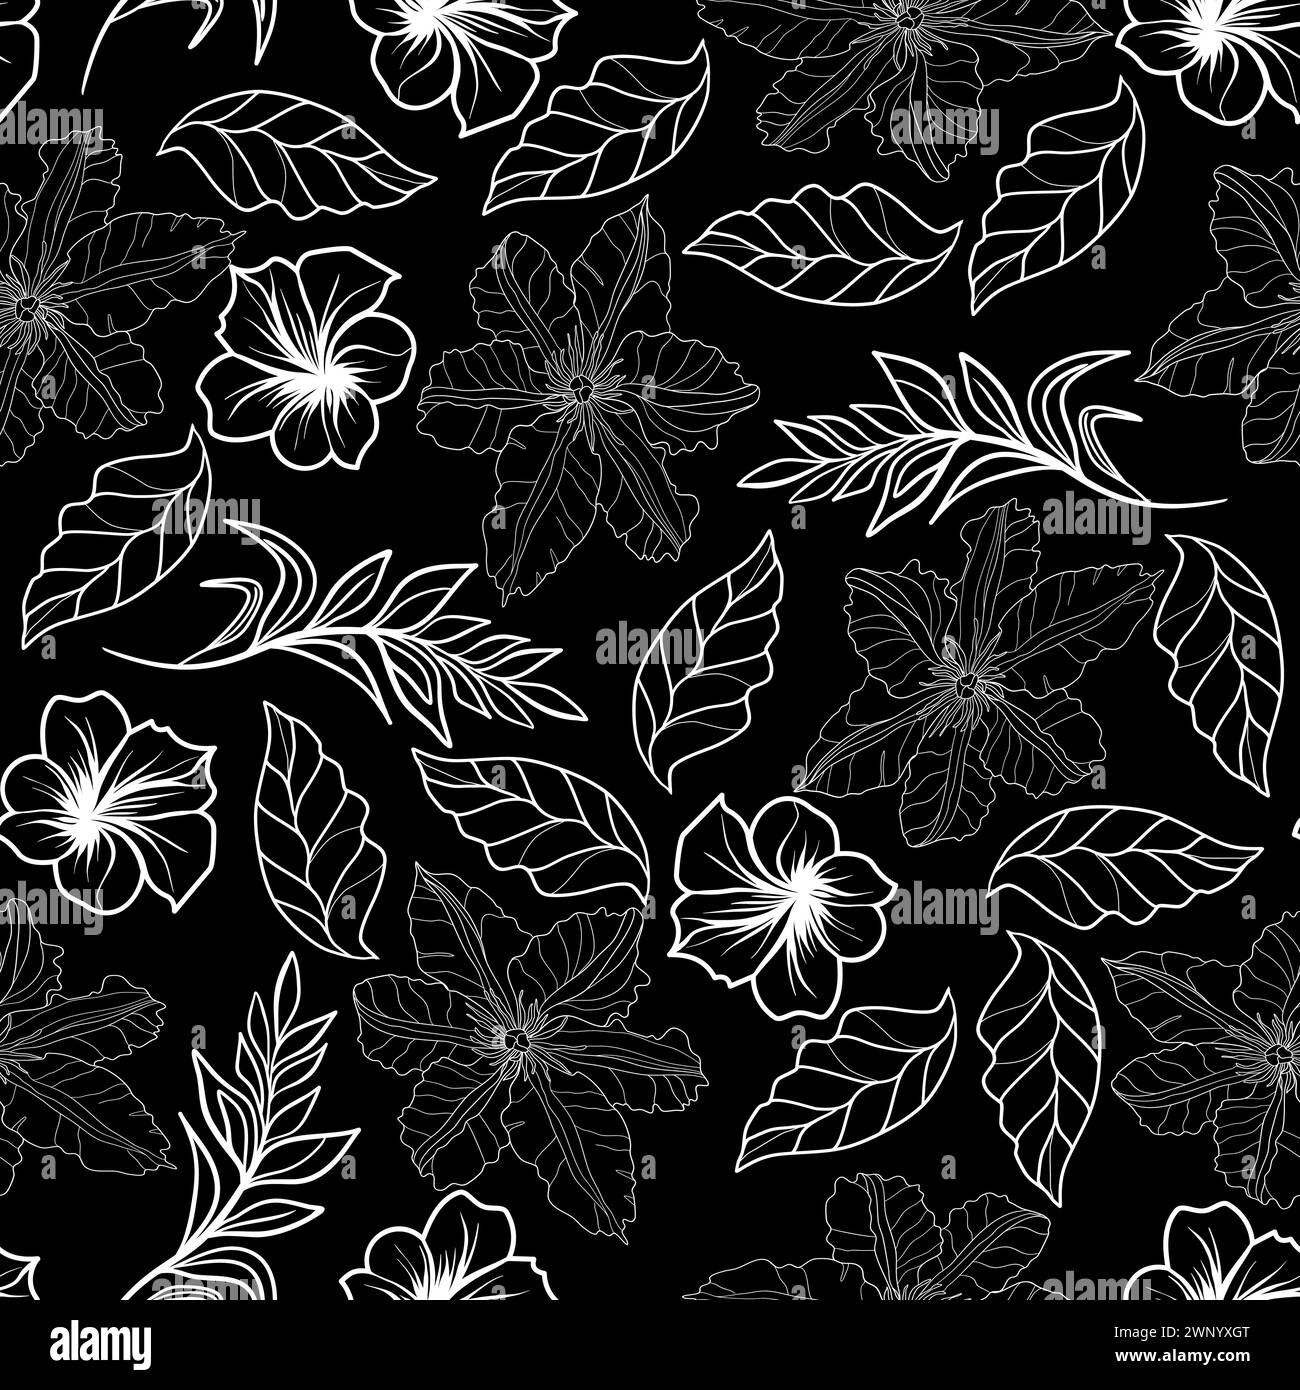 Seamless floral pattern with clematis flowers, plumeria and leaves vector illustration Stock Vector